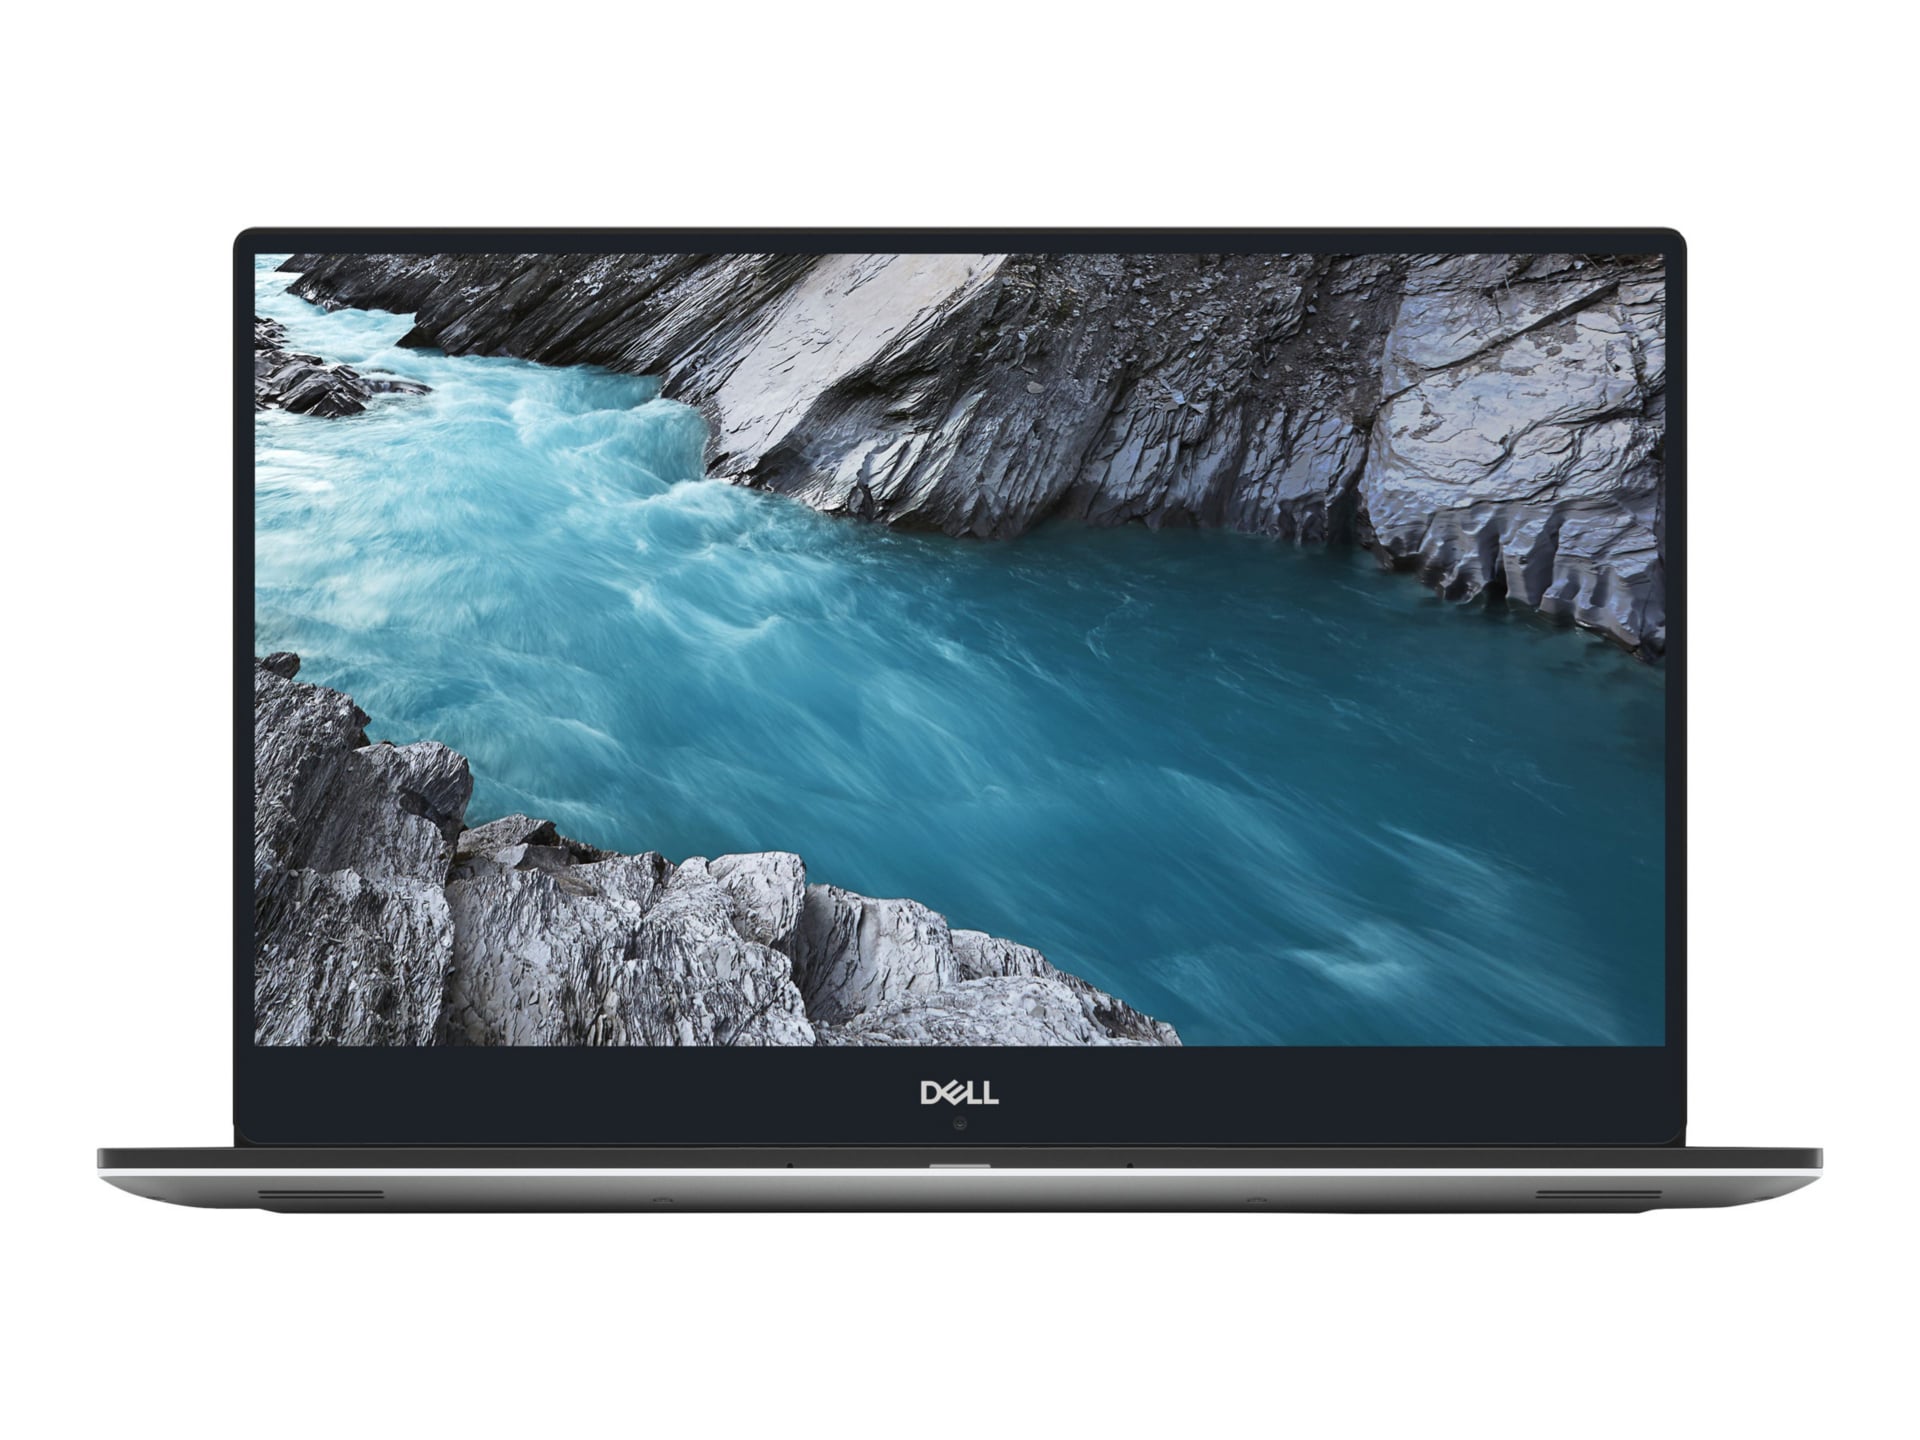 Dell XPS 15 9570 - 15.6" - Core i7 8750H - 16 GB RAM - 512 GB SSD - with 1-